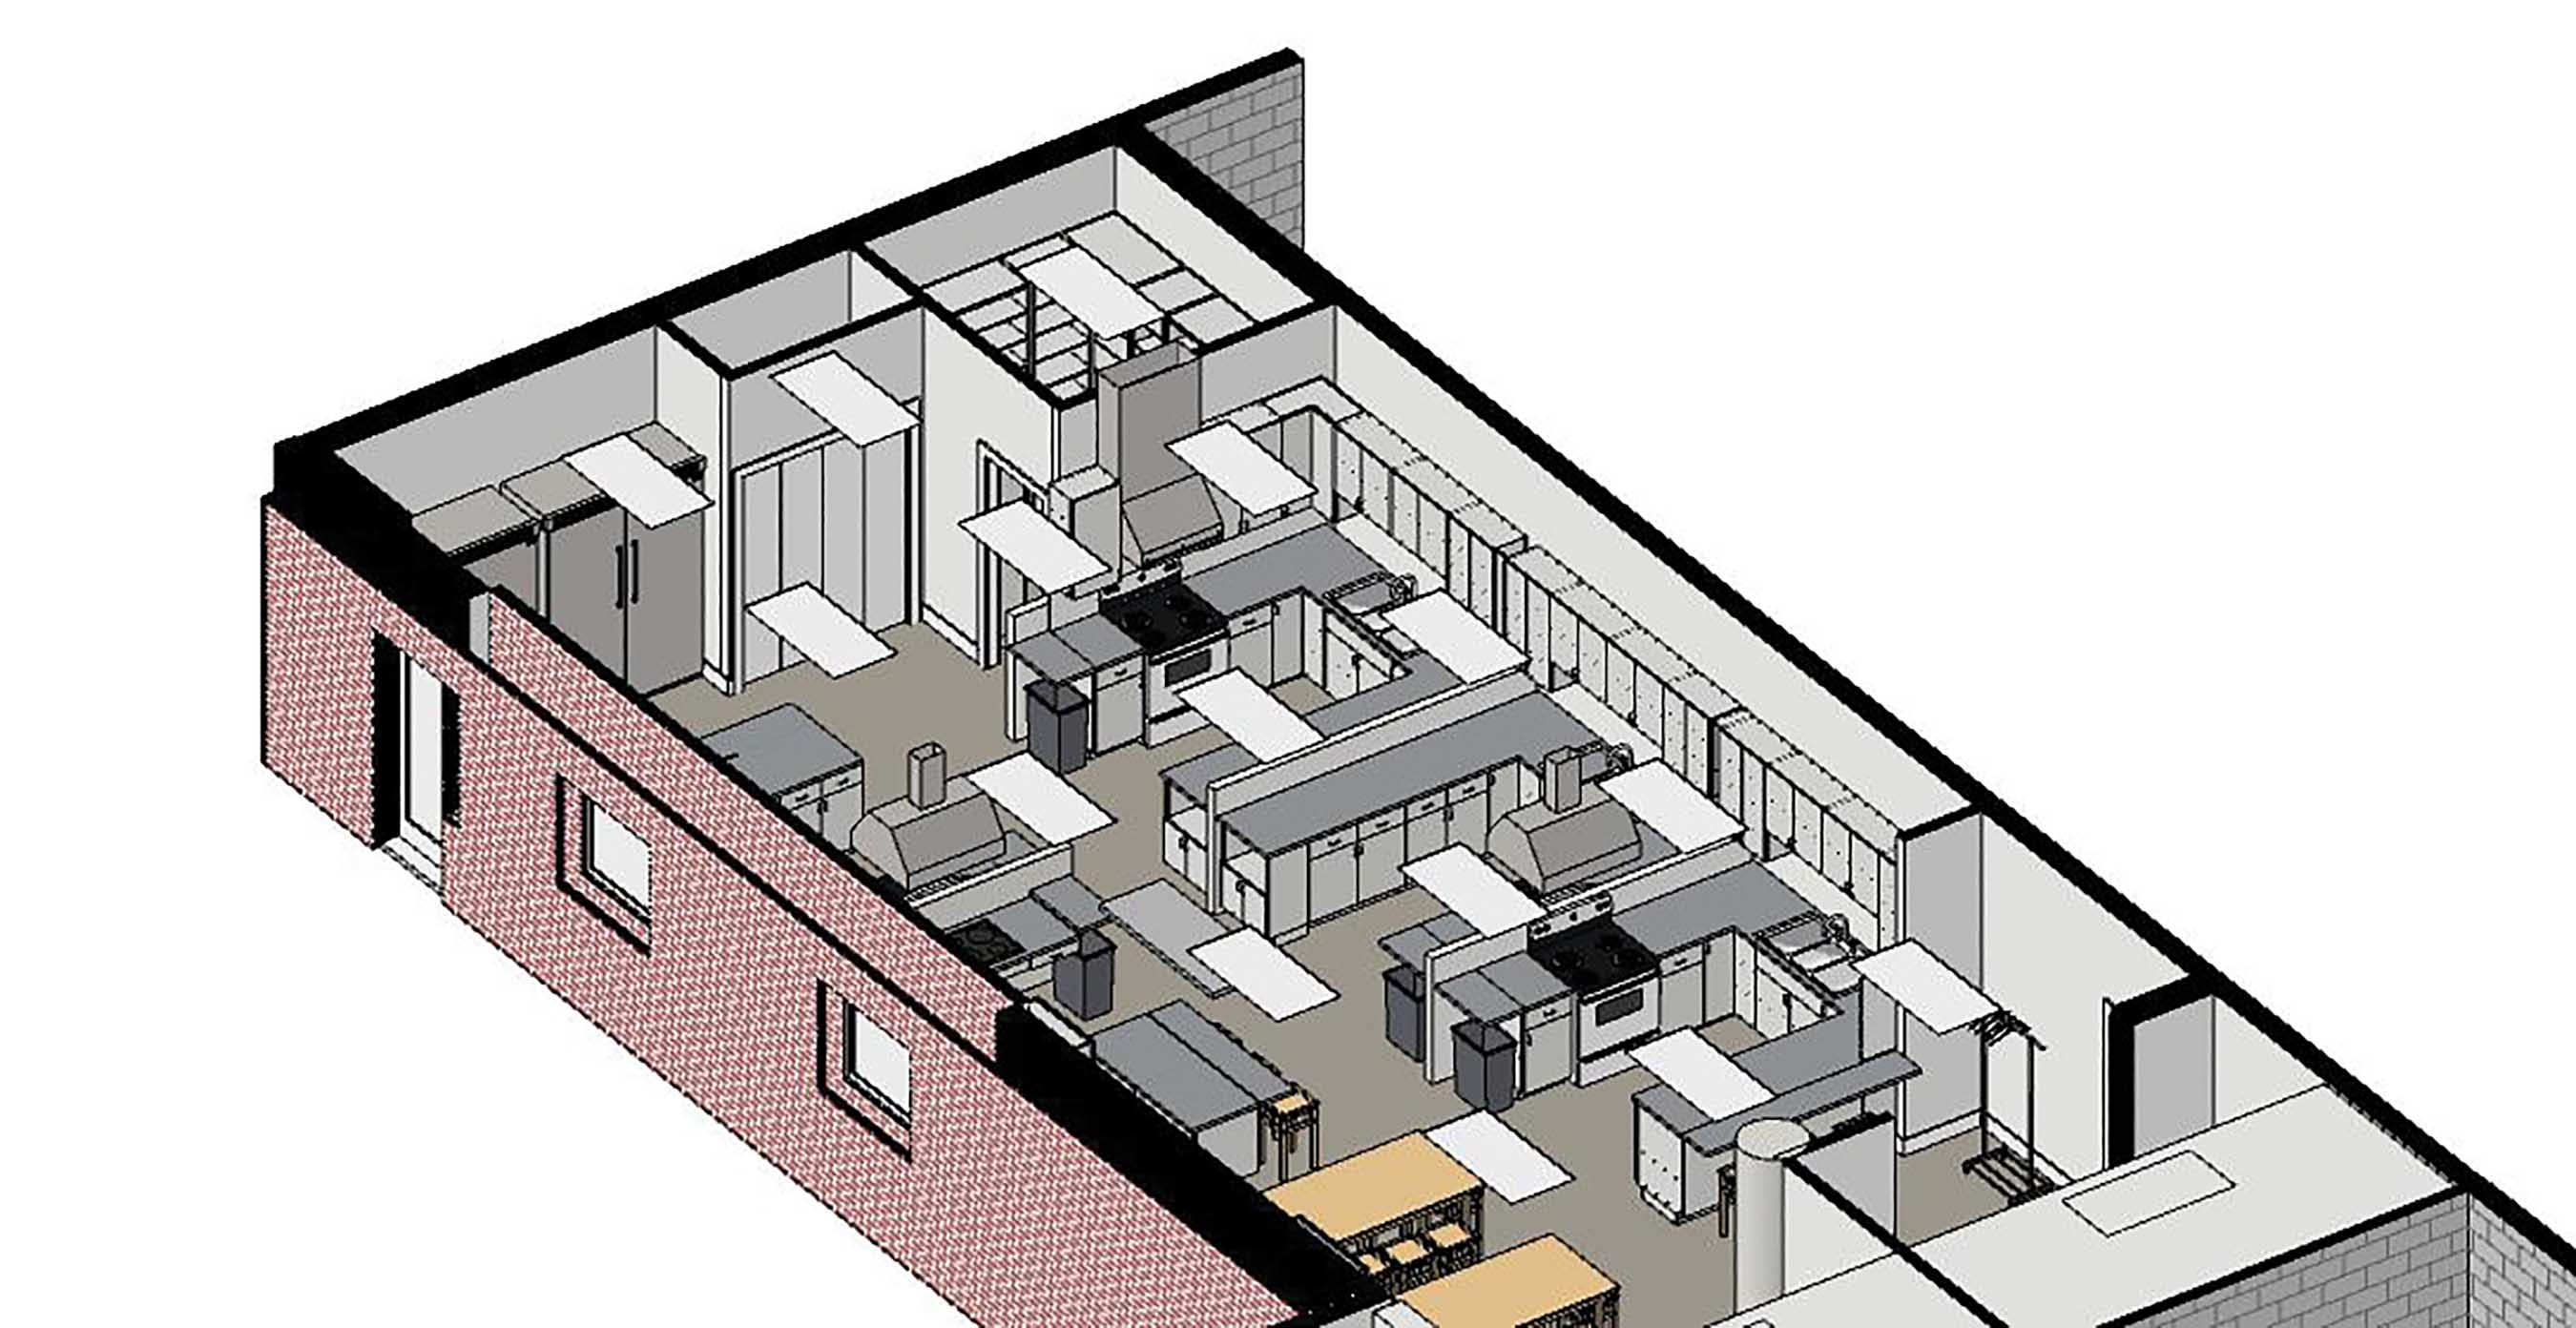 The plan for the new home ec/commercial cooking space in the current library.